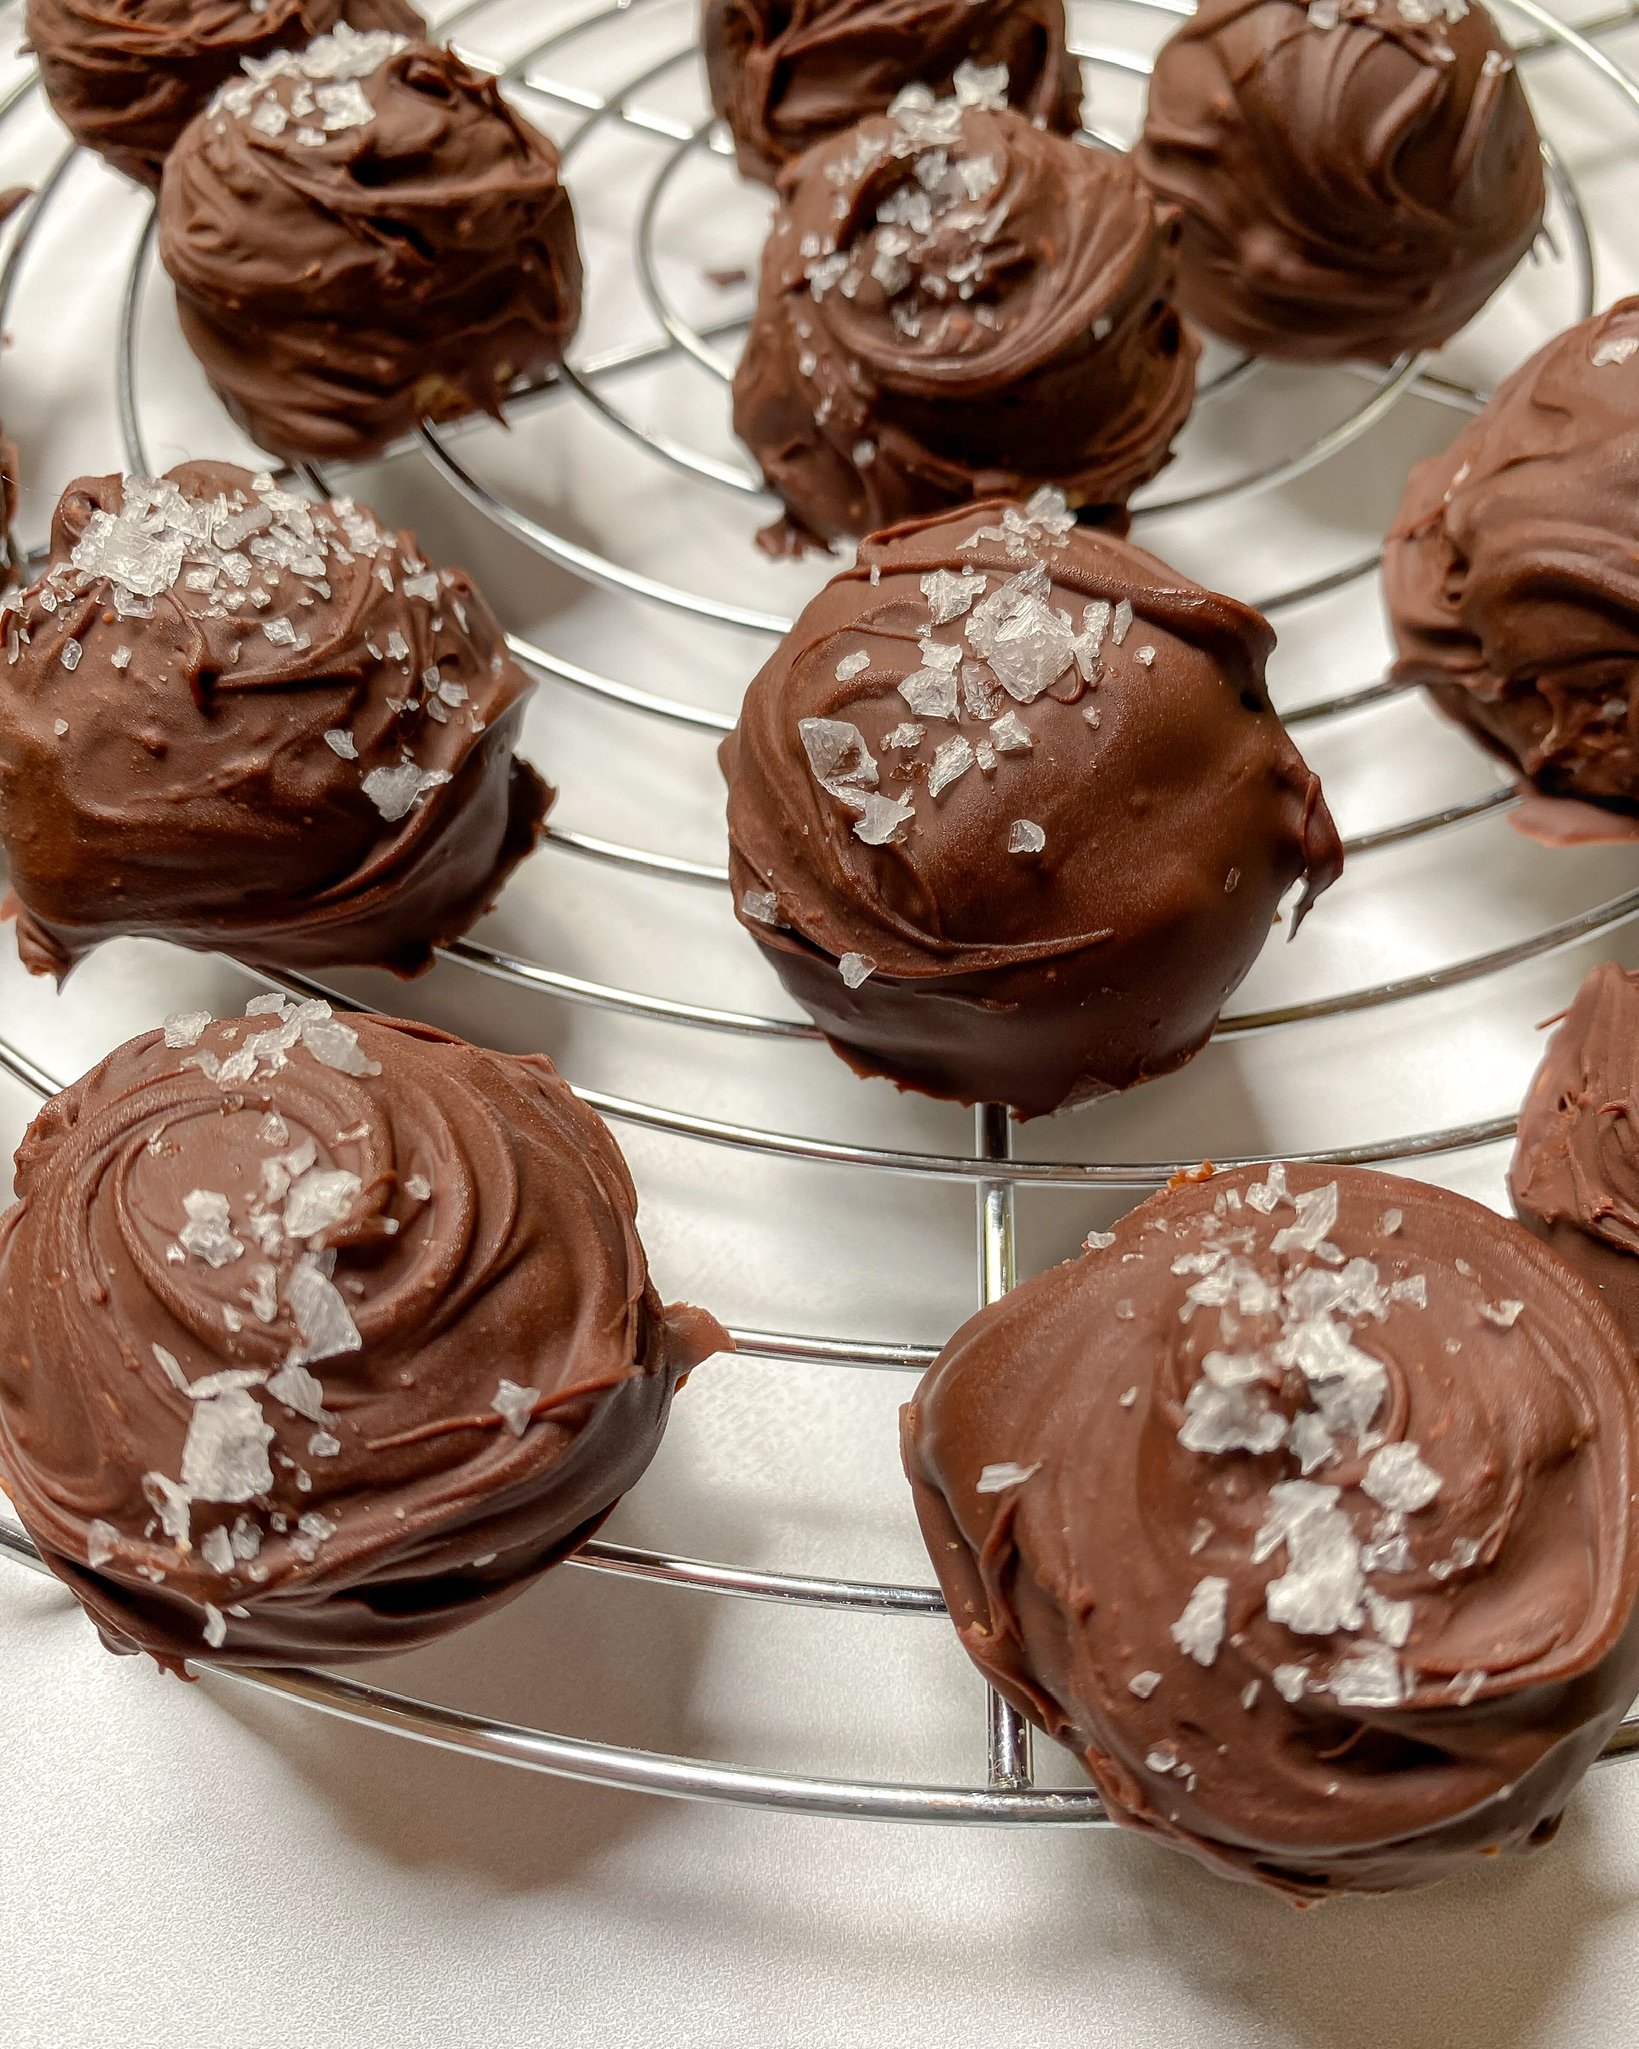 healthy brookie batter bites as chocolate dipped truffles on a baking sheet